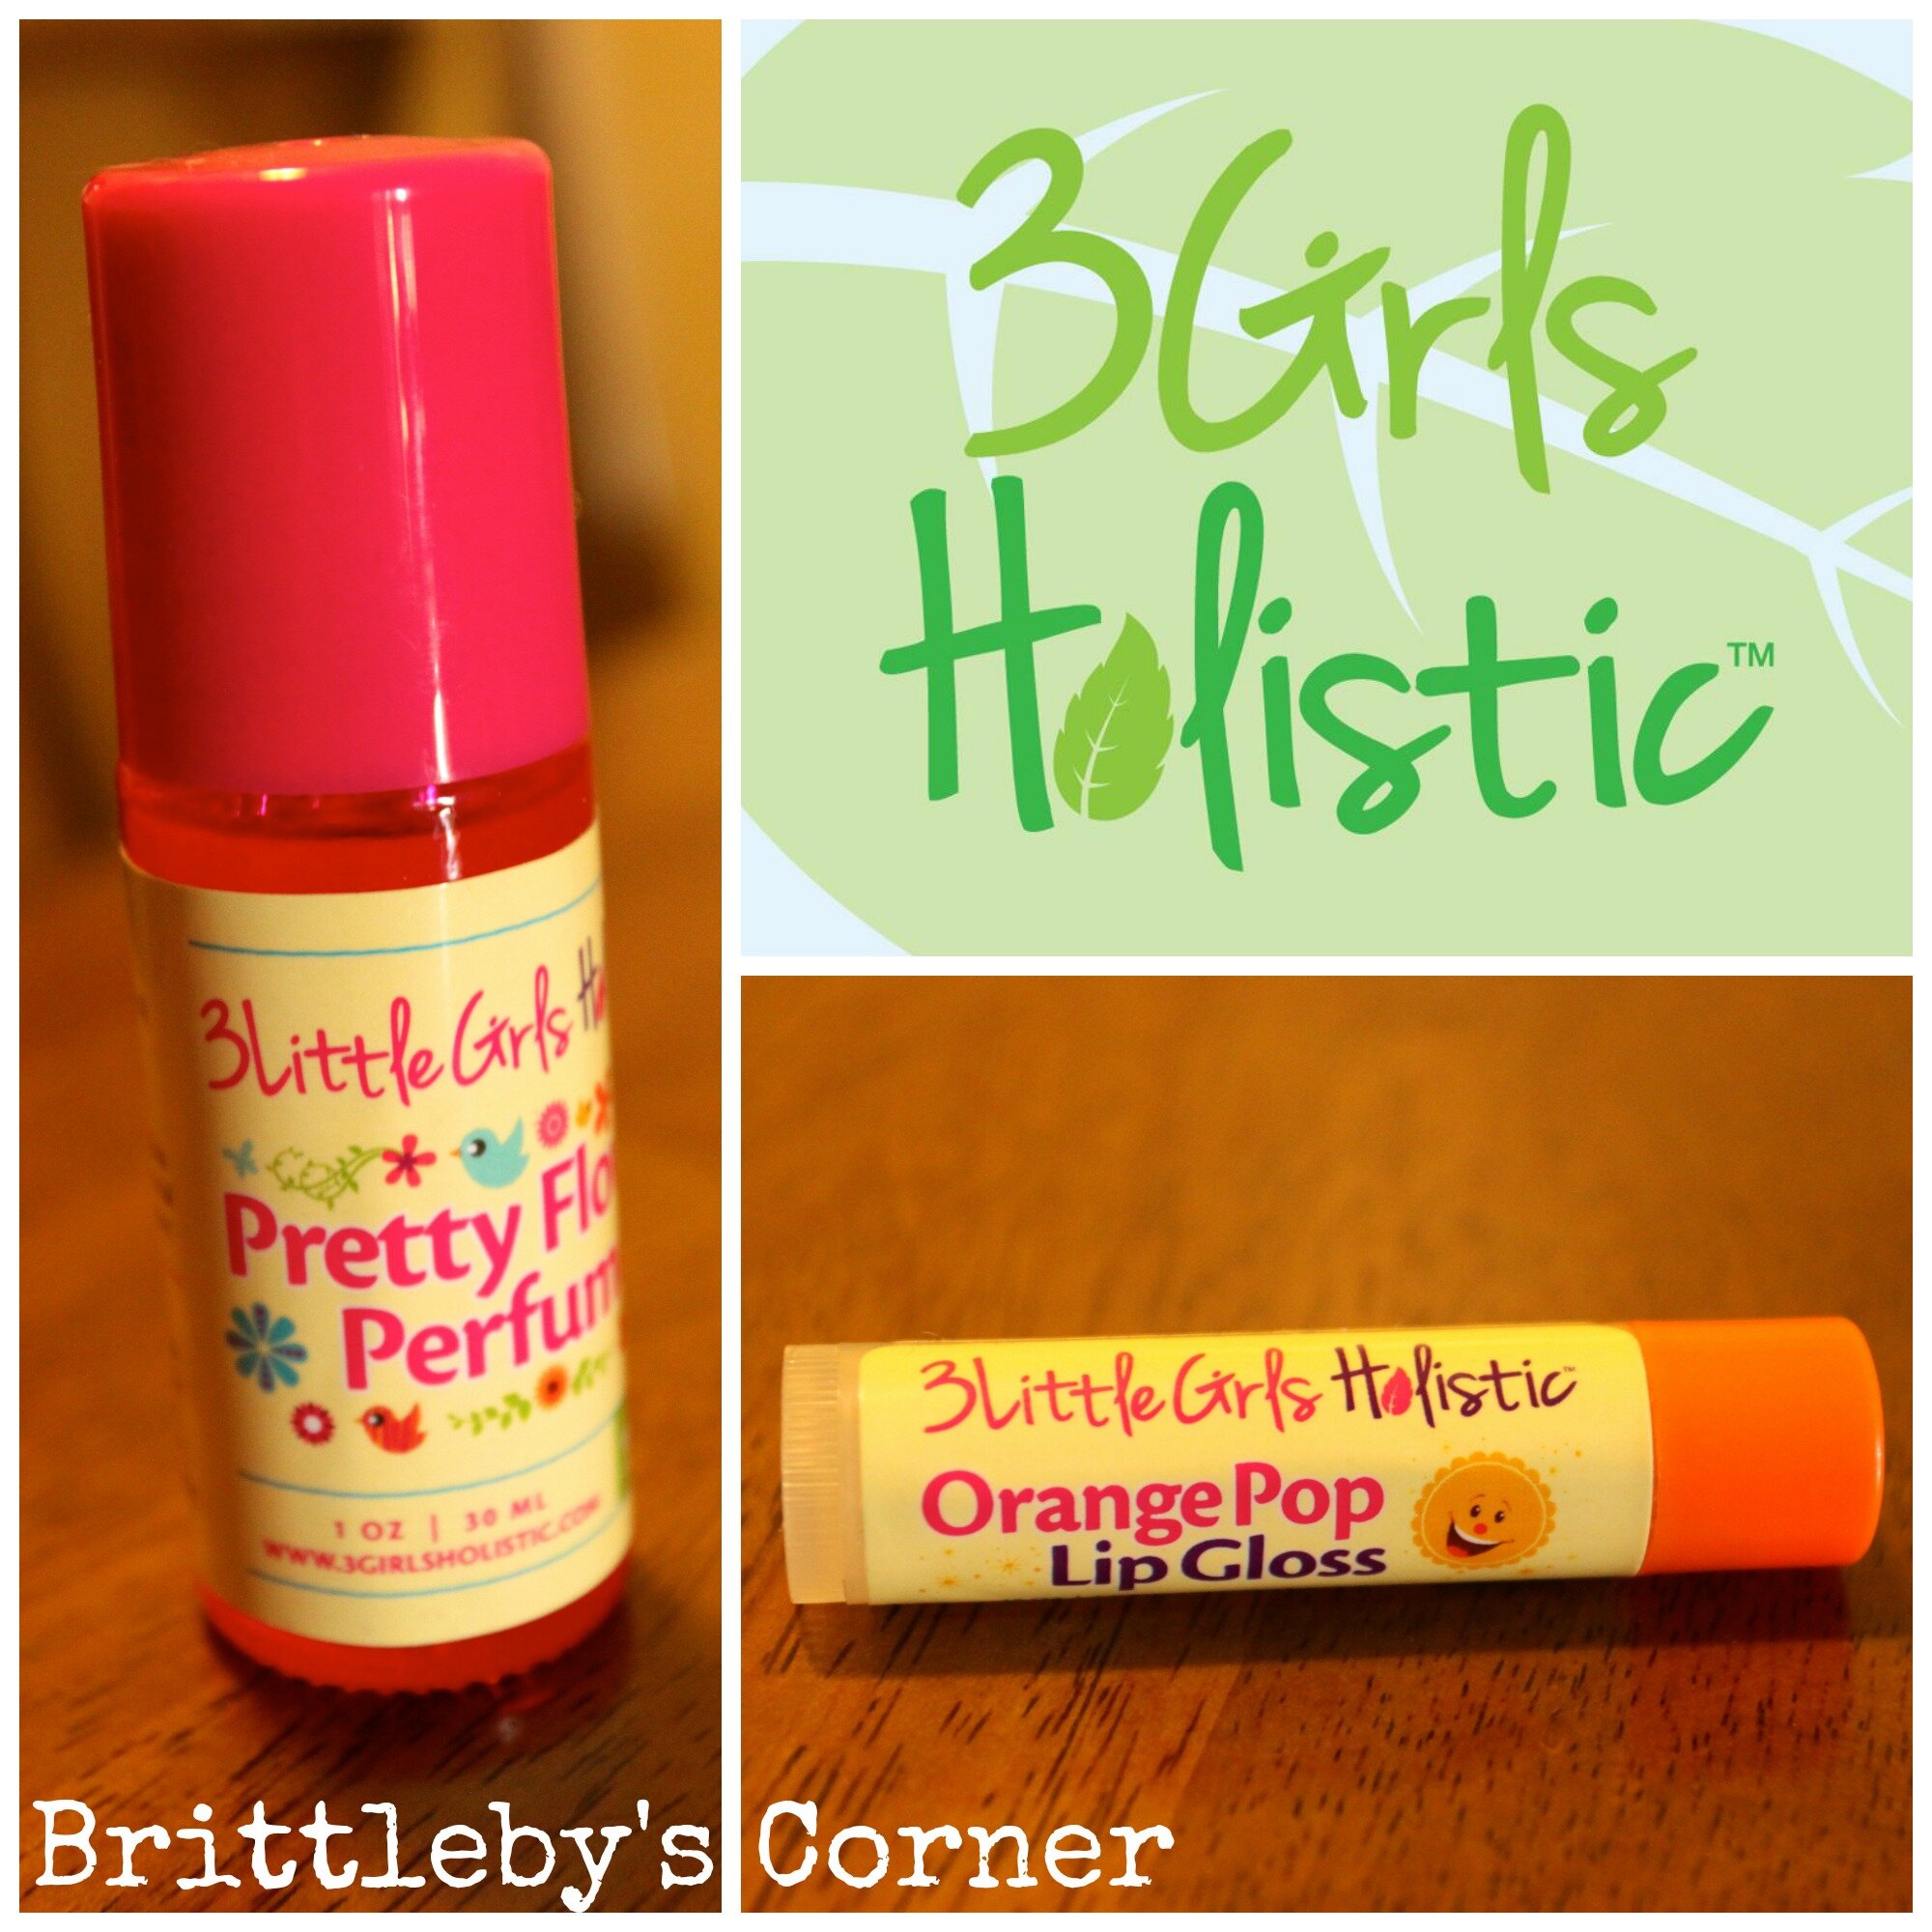 3 Little Girls Holistic ~ So they can be just like mom!